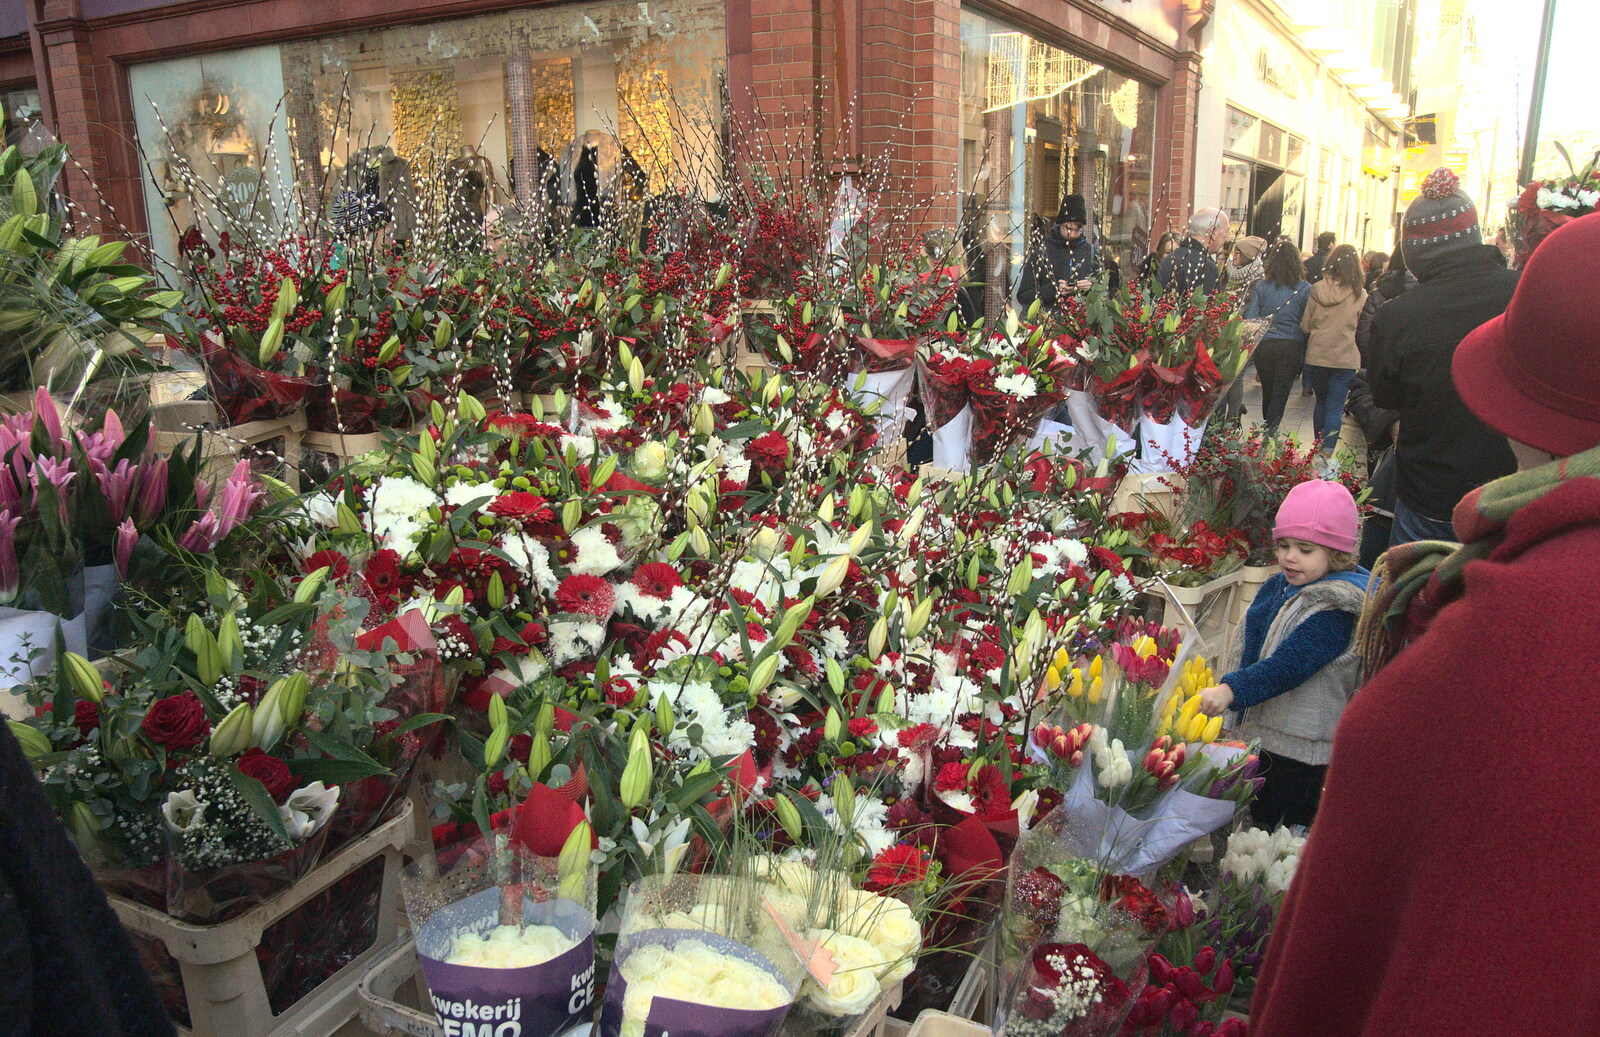 A mass of red and white flowers from Christmas Eve in Dublin and Blackrock, Ireland - 24th December 2015